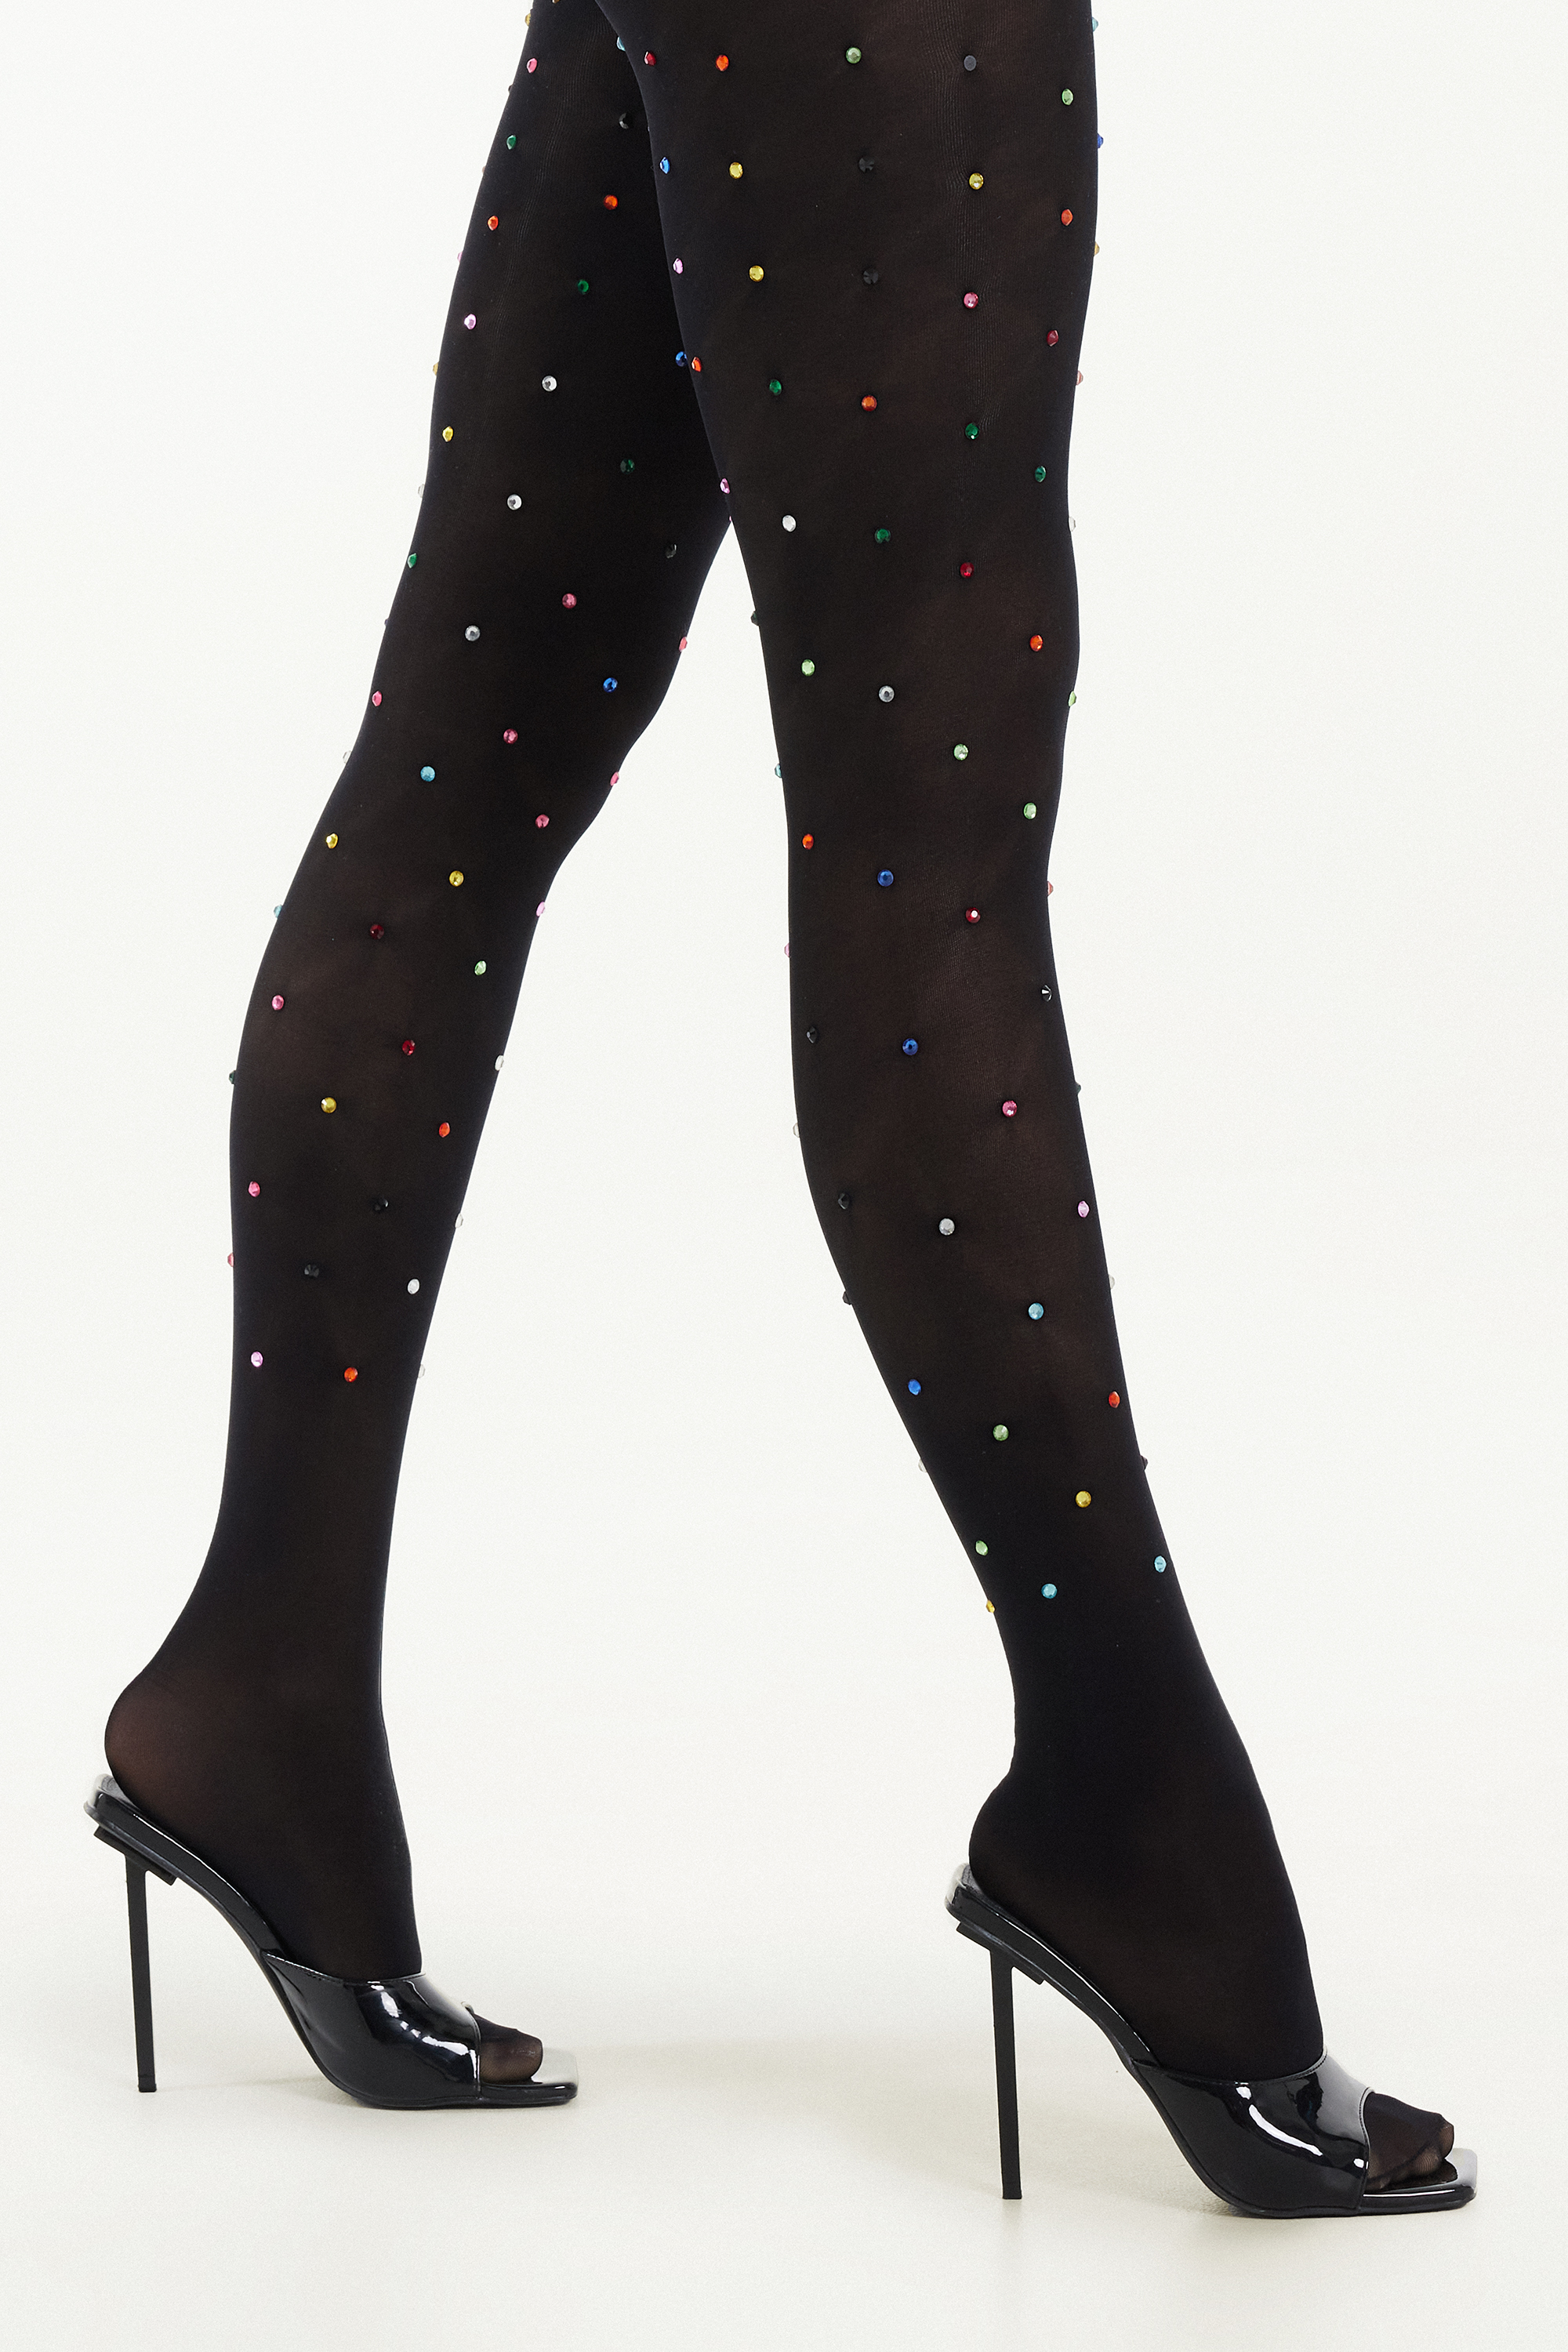 Limited Edition Tights Colored Rhinestones